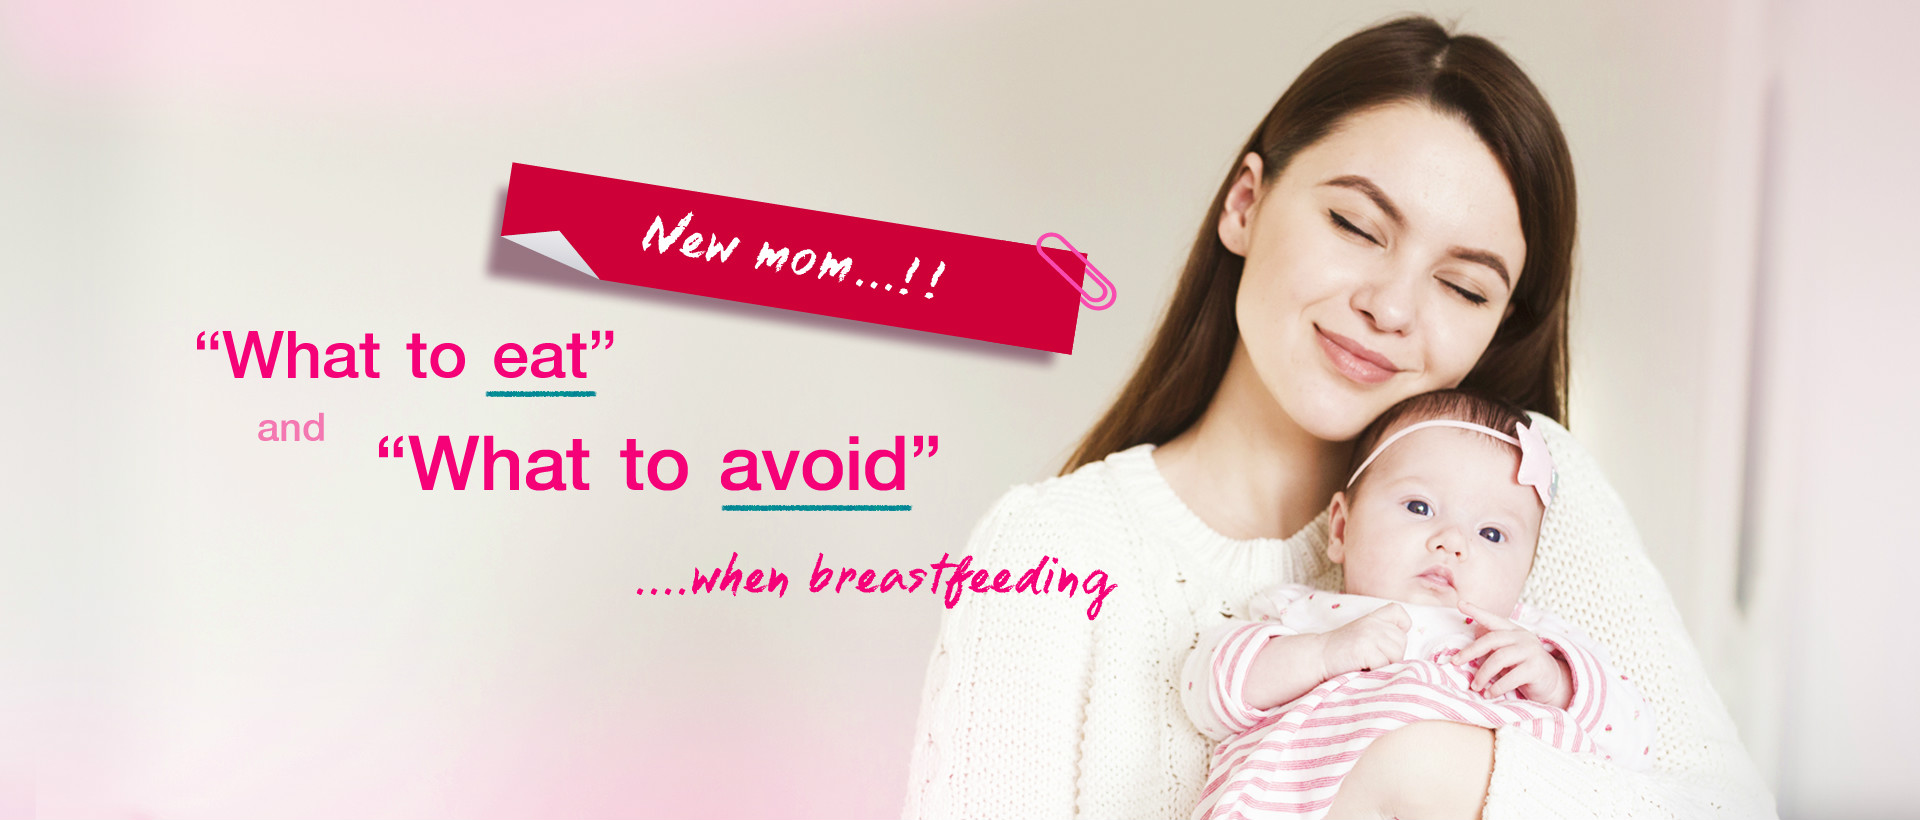 What to eat and what to avoid when breastfeeding